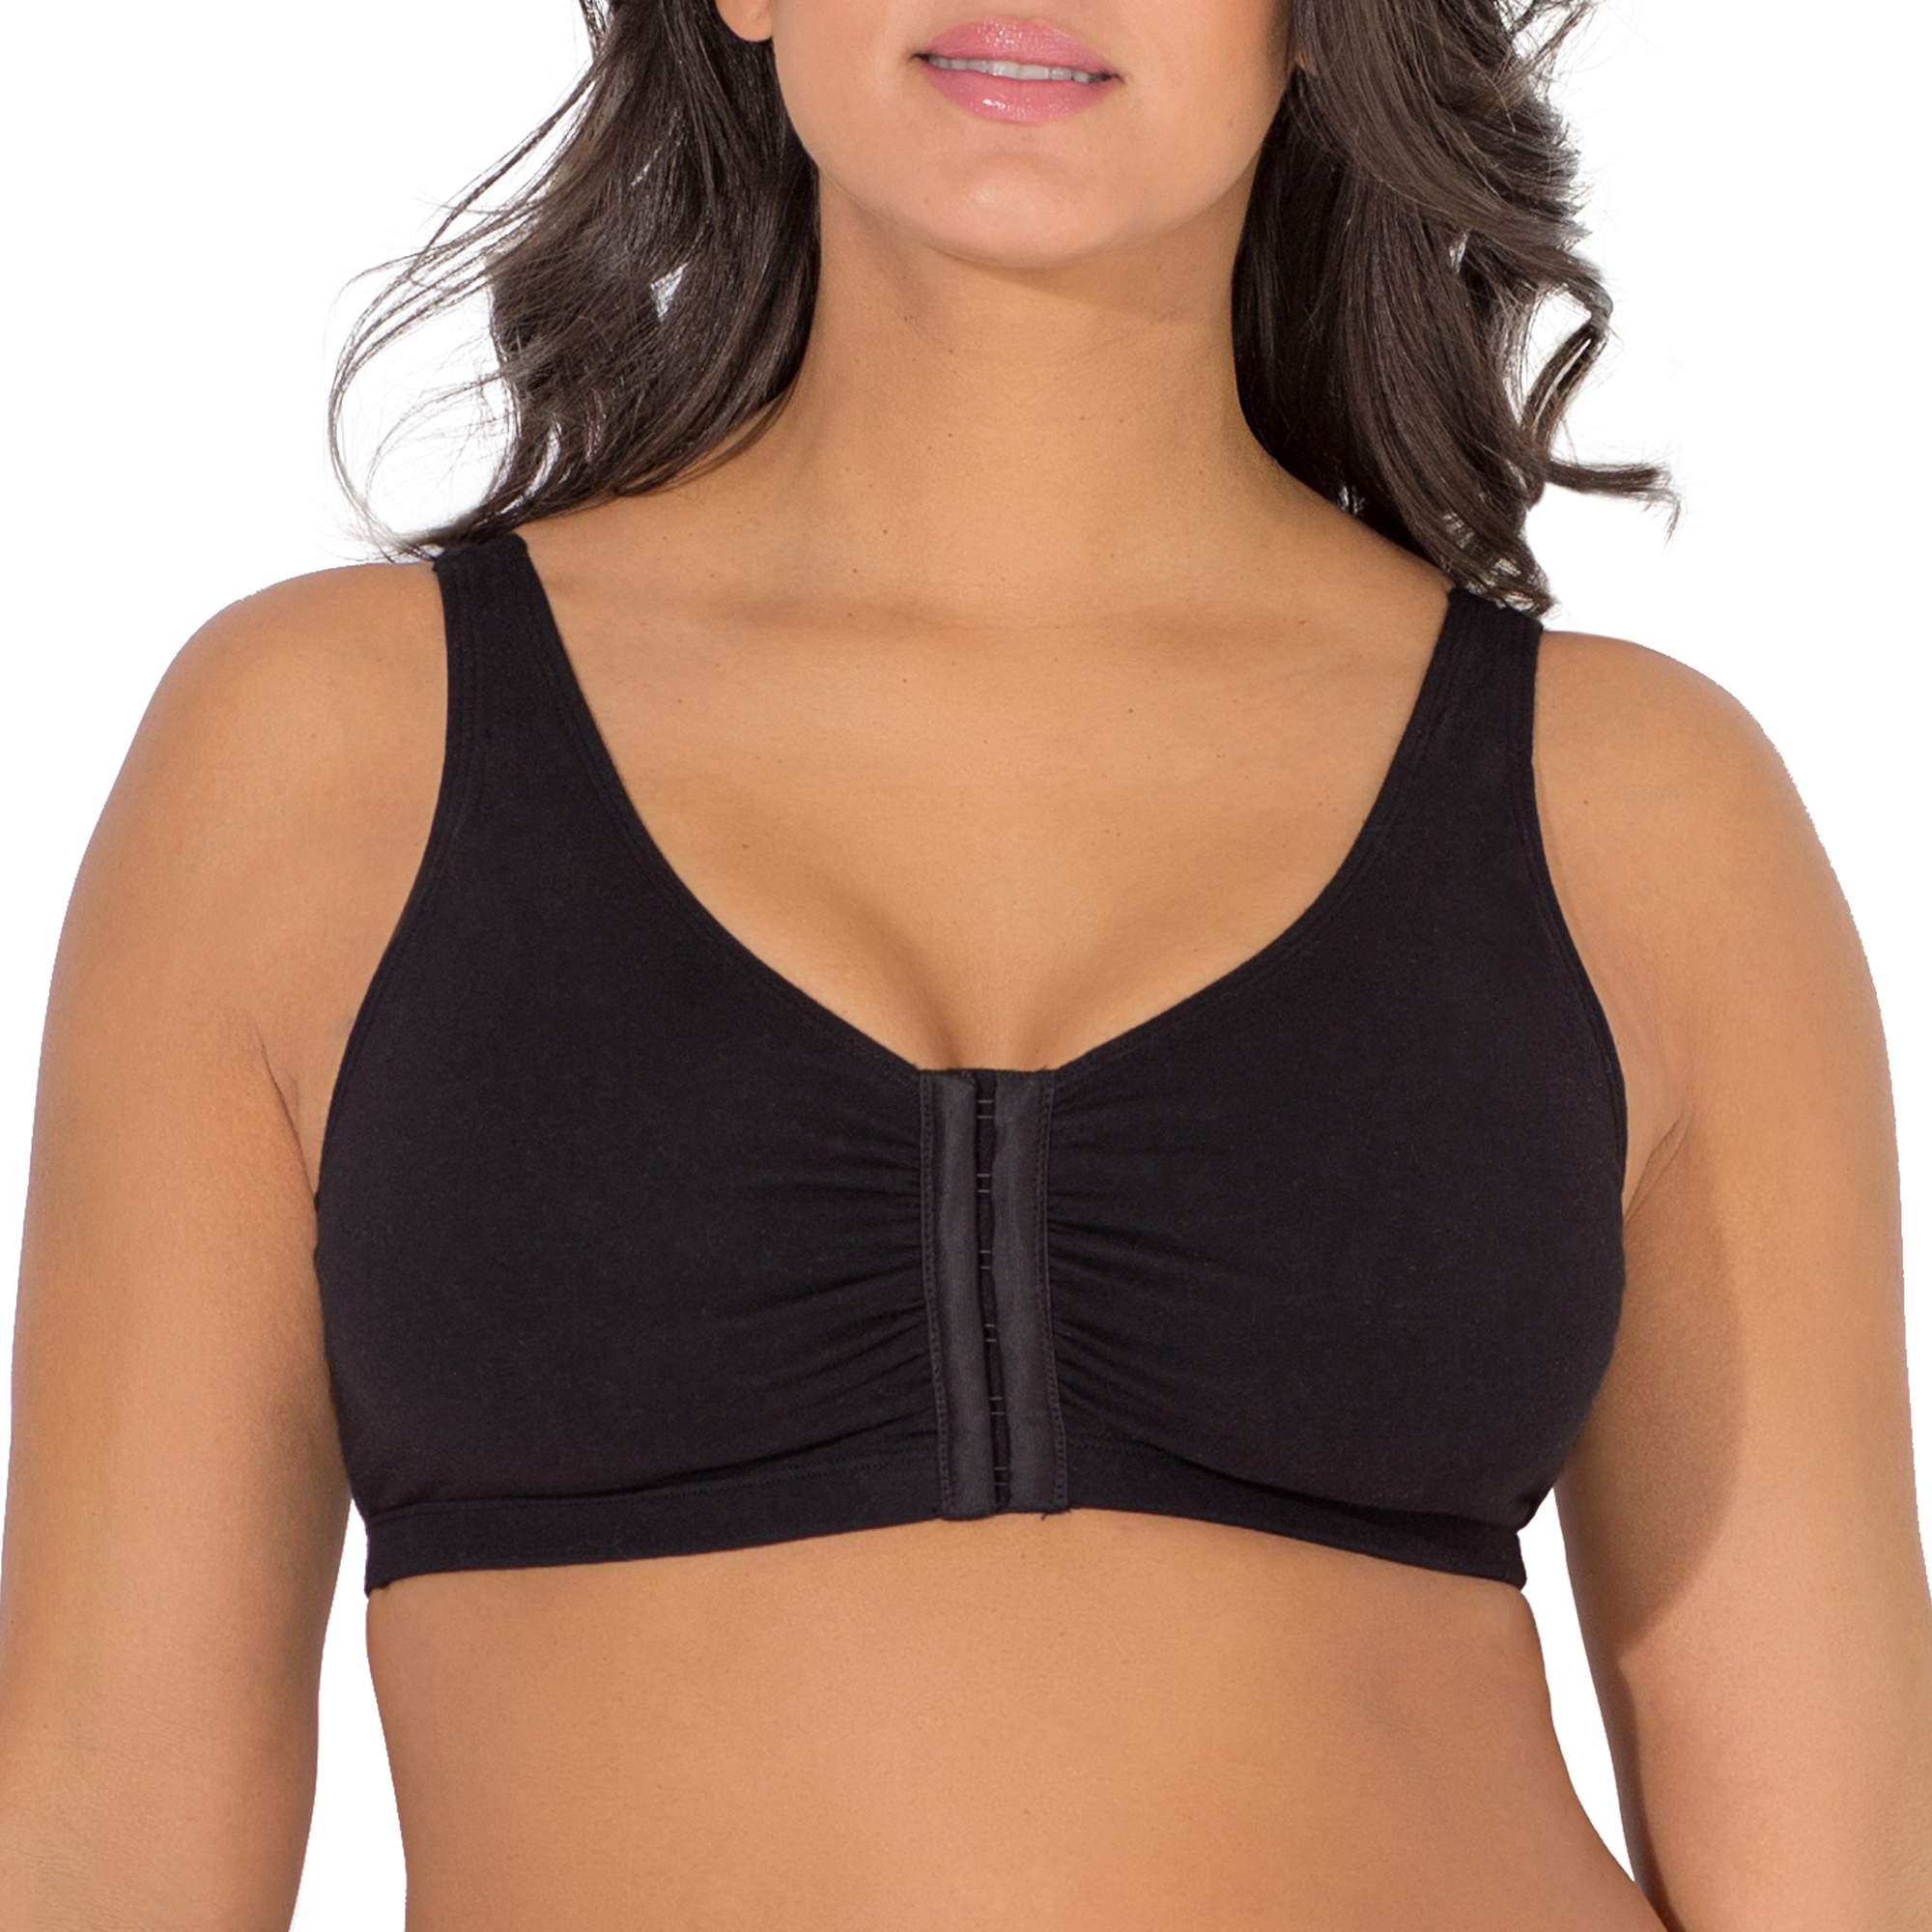 Fruit Of The Loom Women's Seamed Soft Cup Wirefree Cotton Bra 2